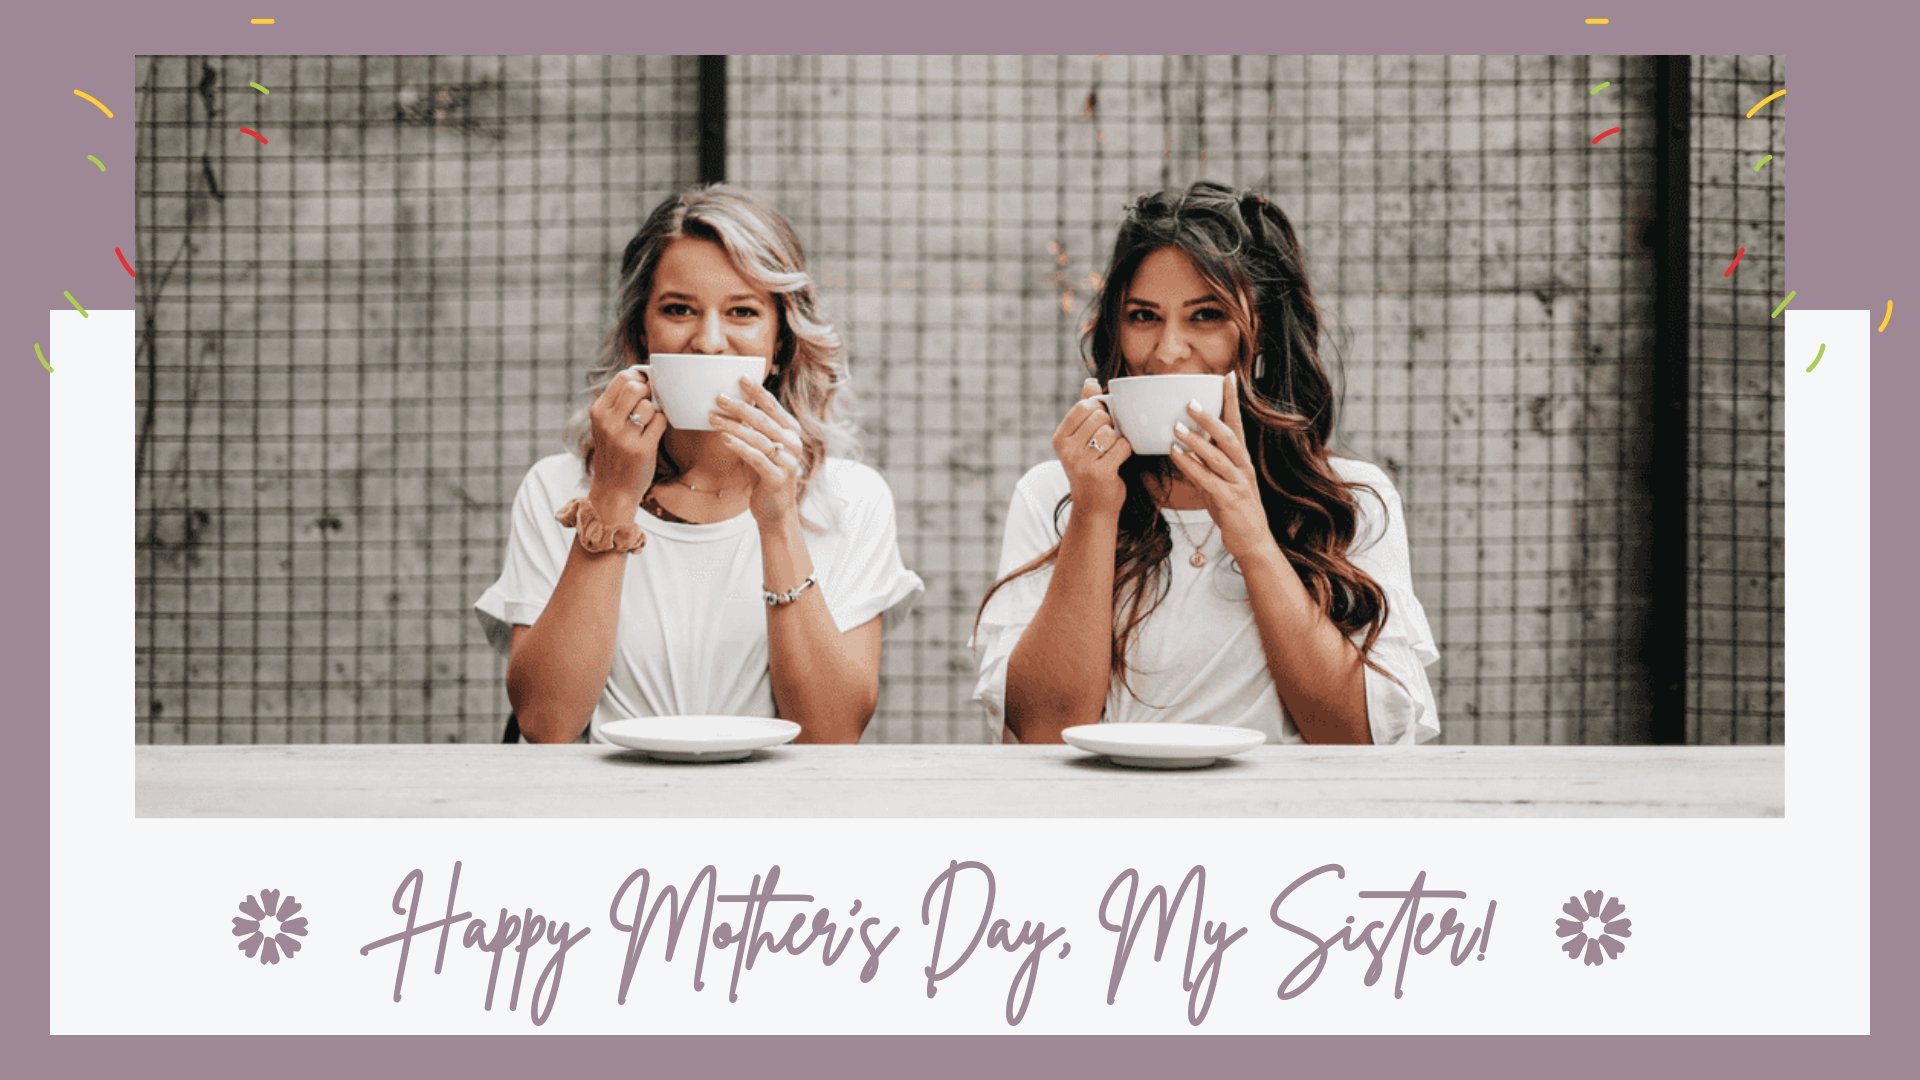 Happy Mother's Day Sister Image Template